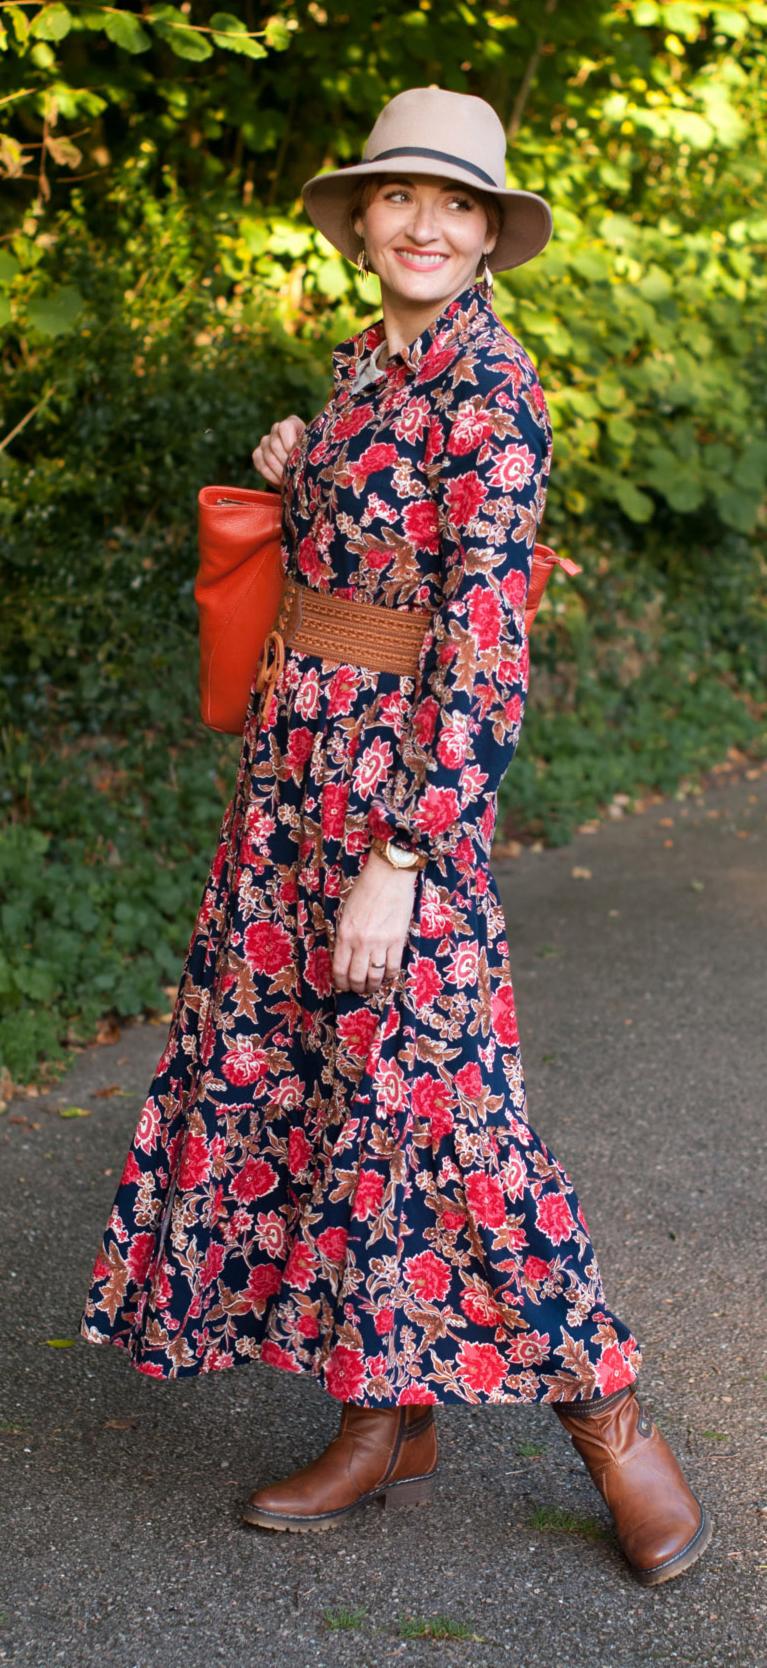 Romantic, Ralph Lauren-inspired 70s style autumn/fall outfit: Floral maxi dress tan belt and boots camel fedora orange leather tote bag | Not Dressed As Lamb, over 40 style